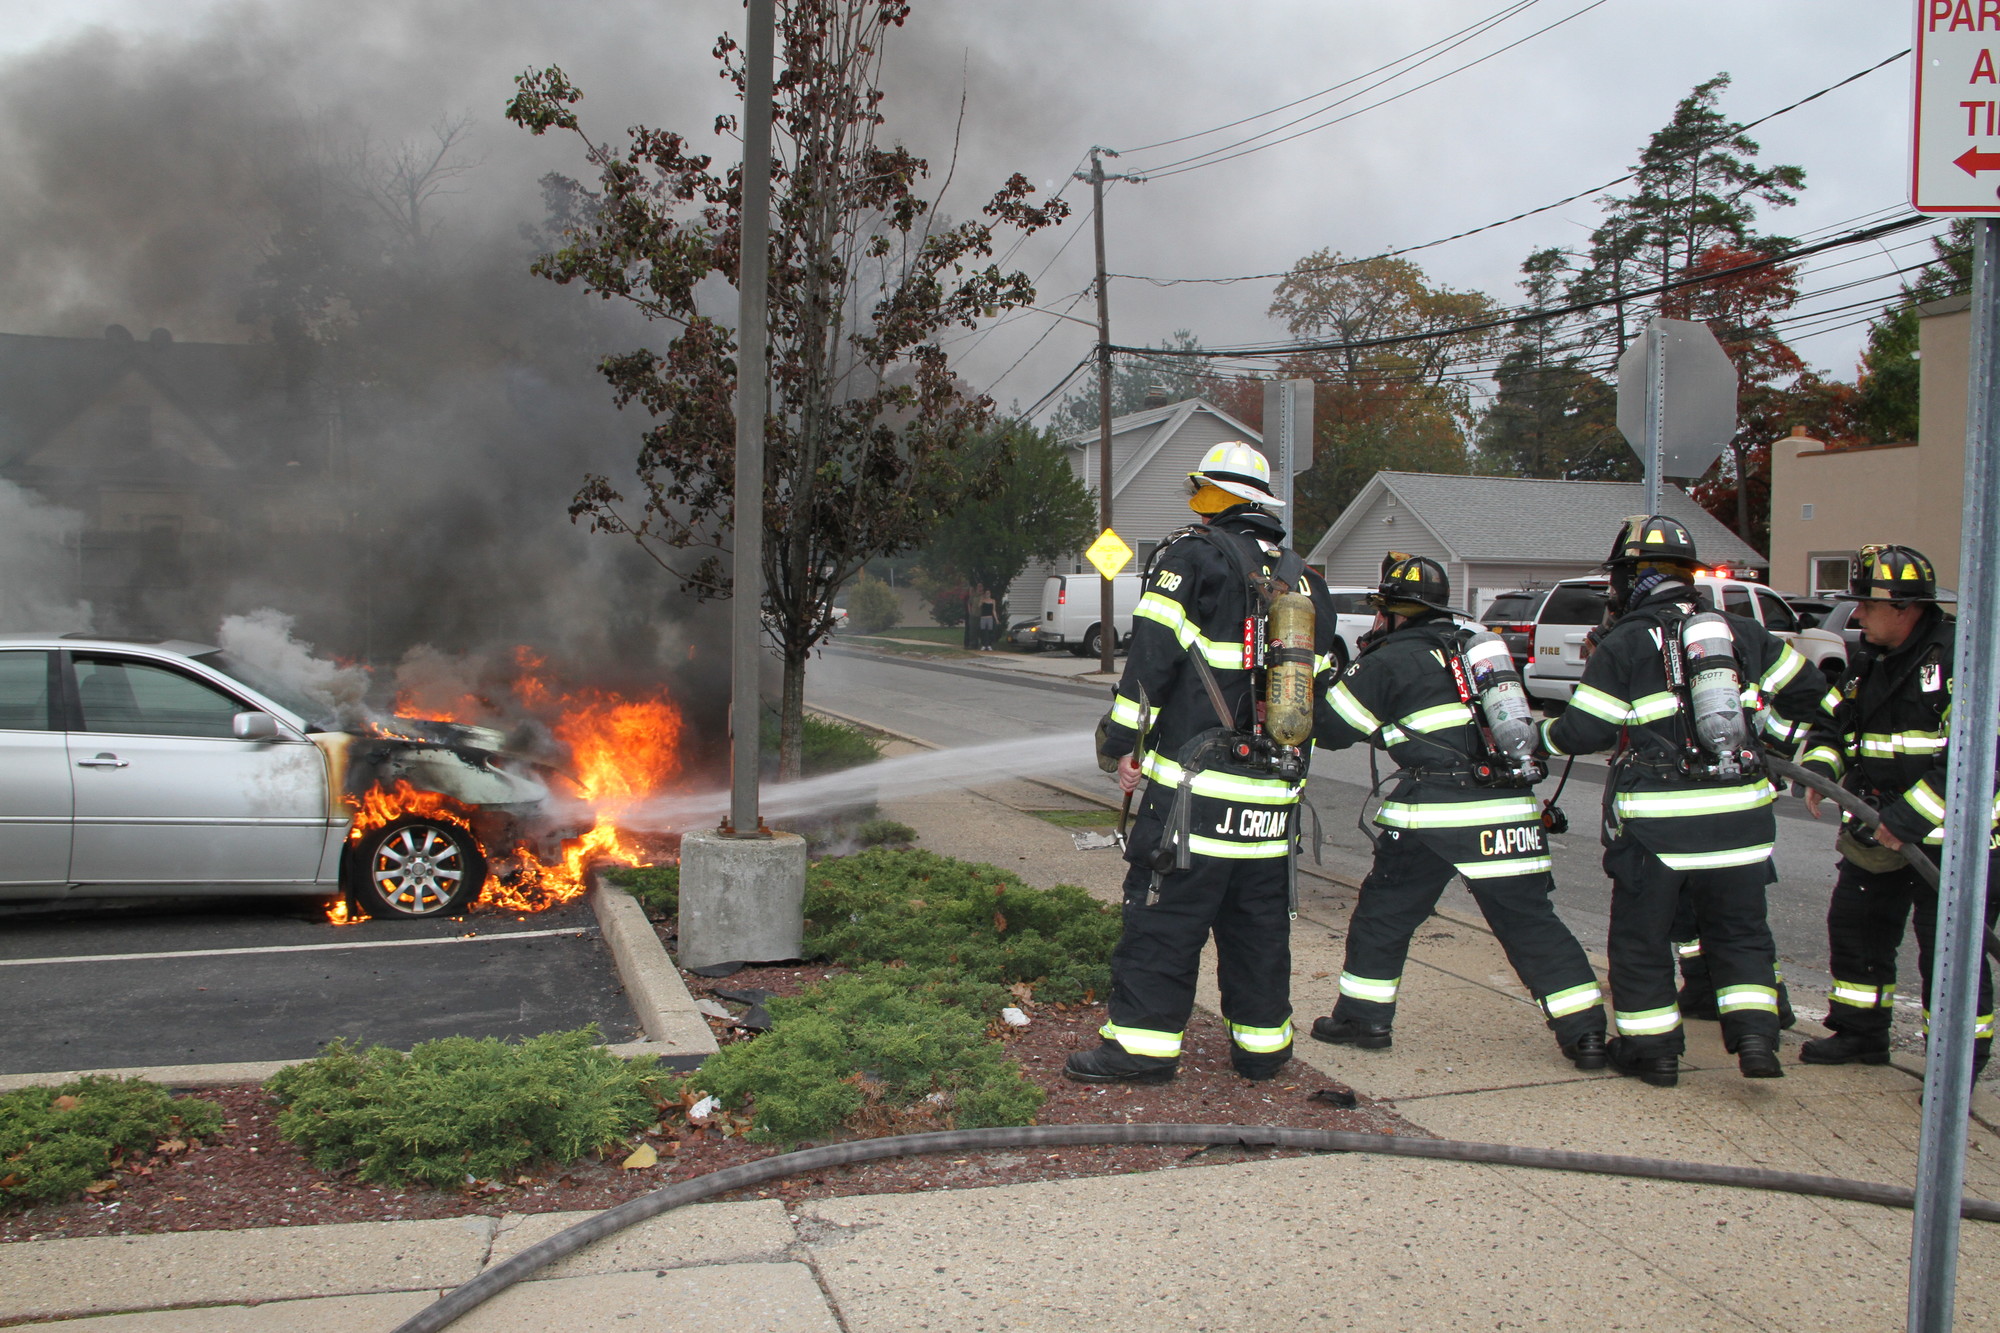 Firefighters extinguished a blaze that broke out under the hood of a car parked in the lot of NEFCU